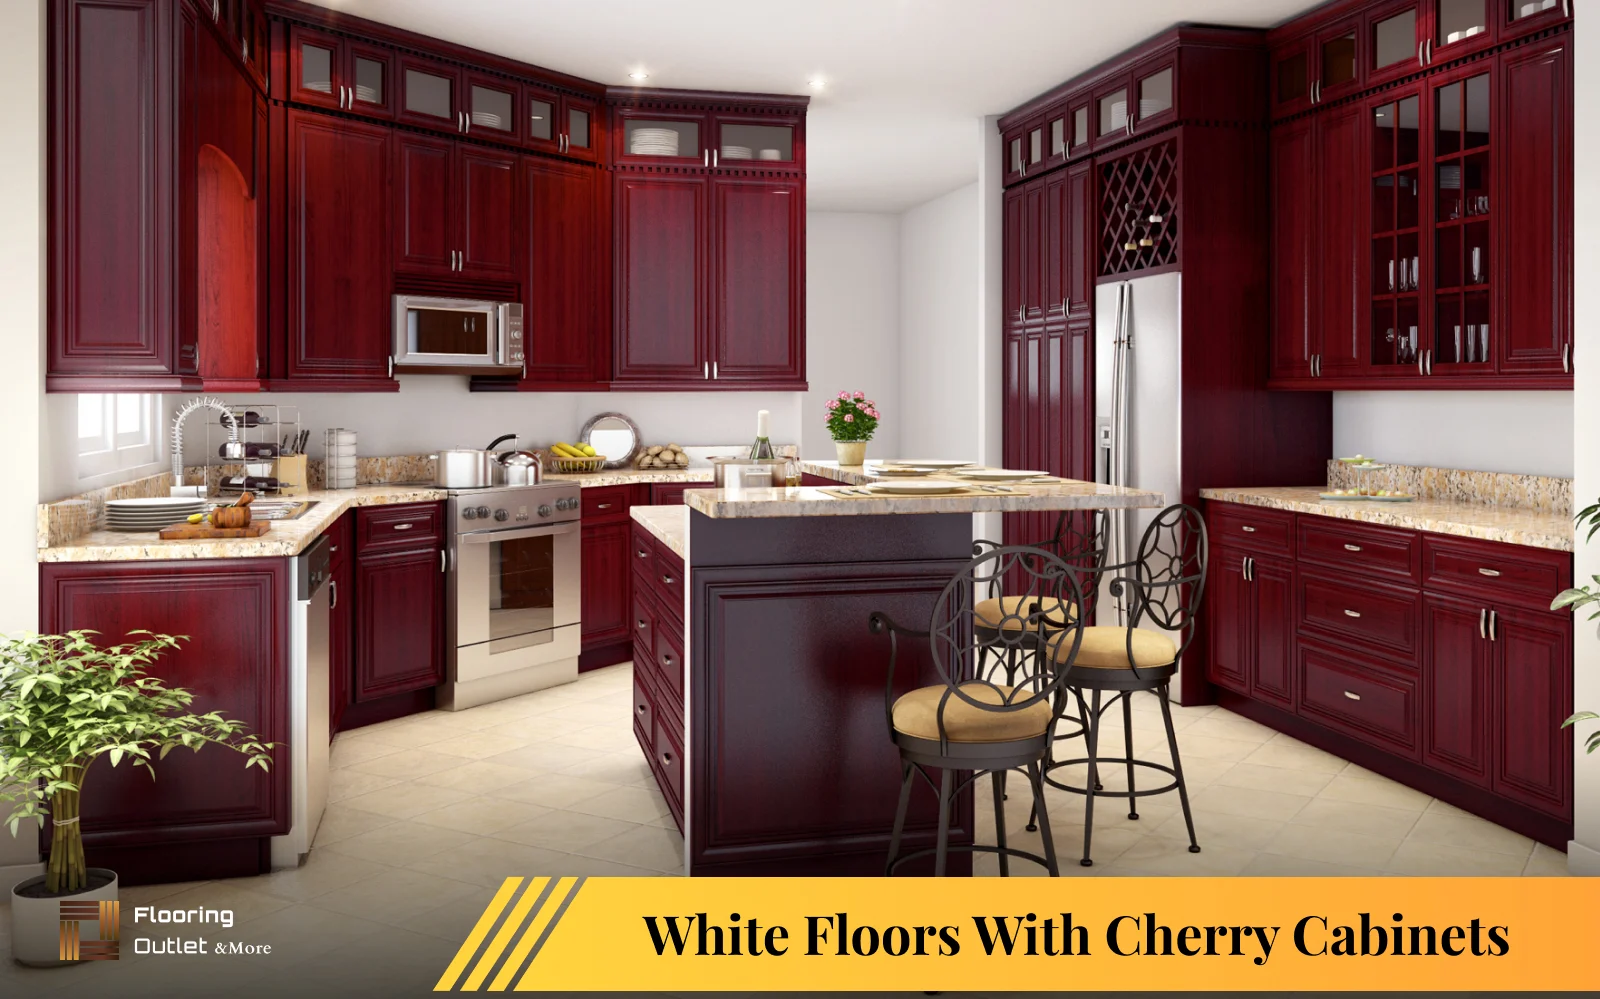 White Oak Floors With Cherry Cabinets